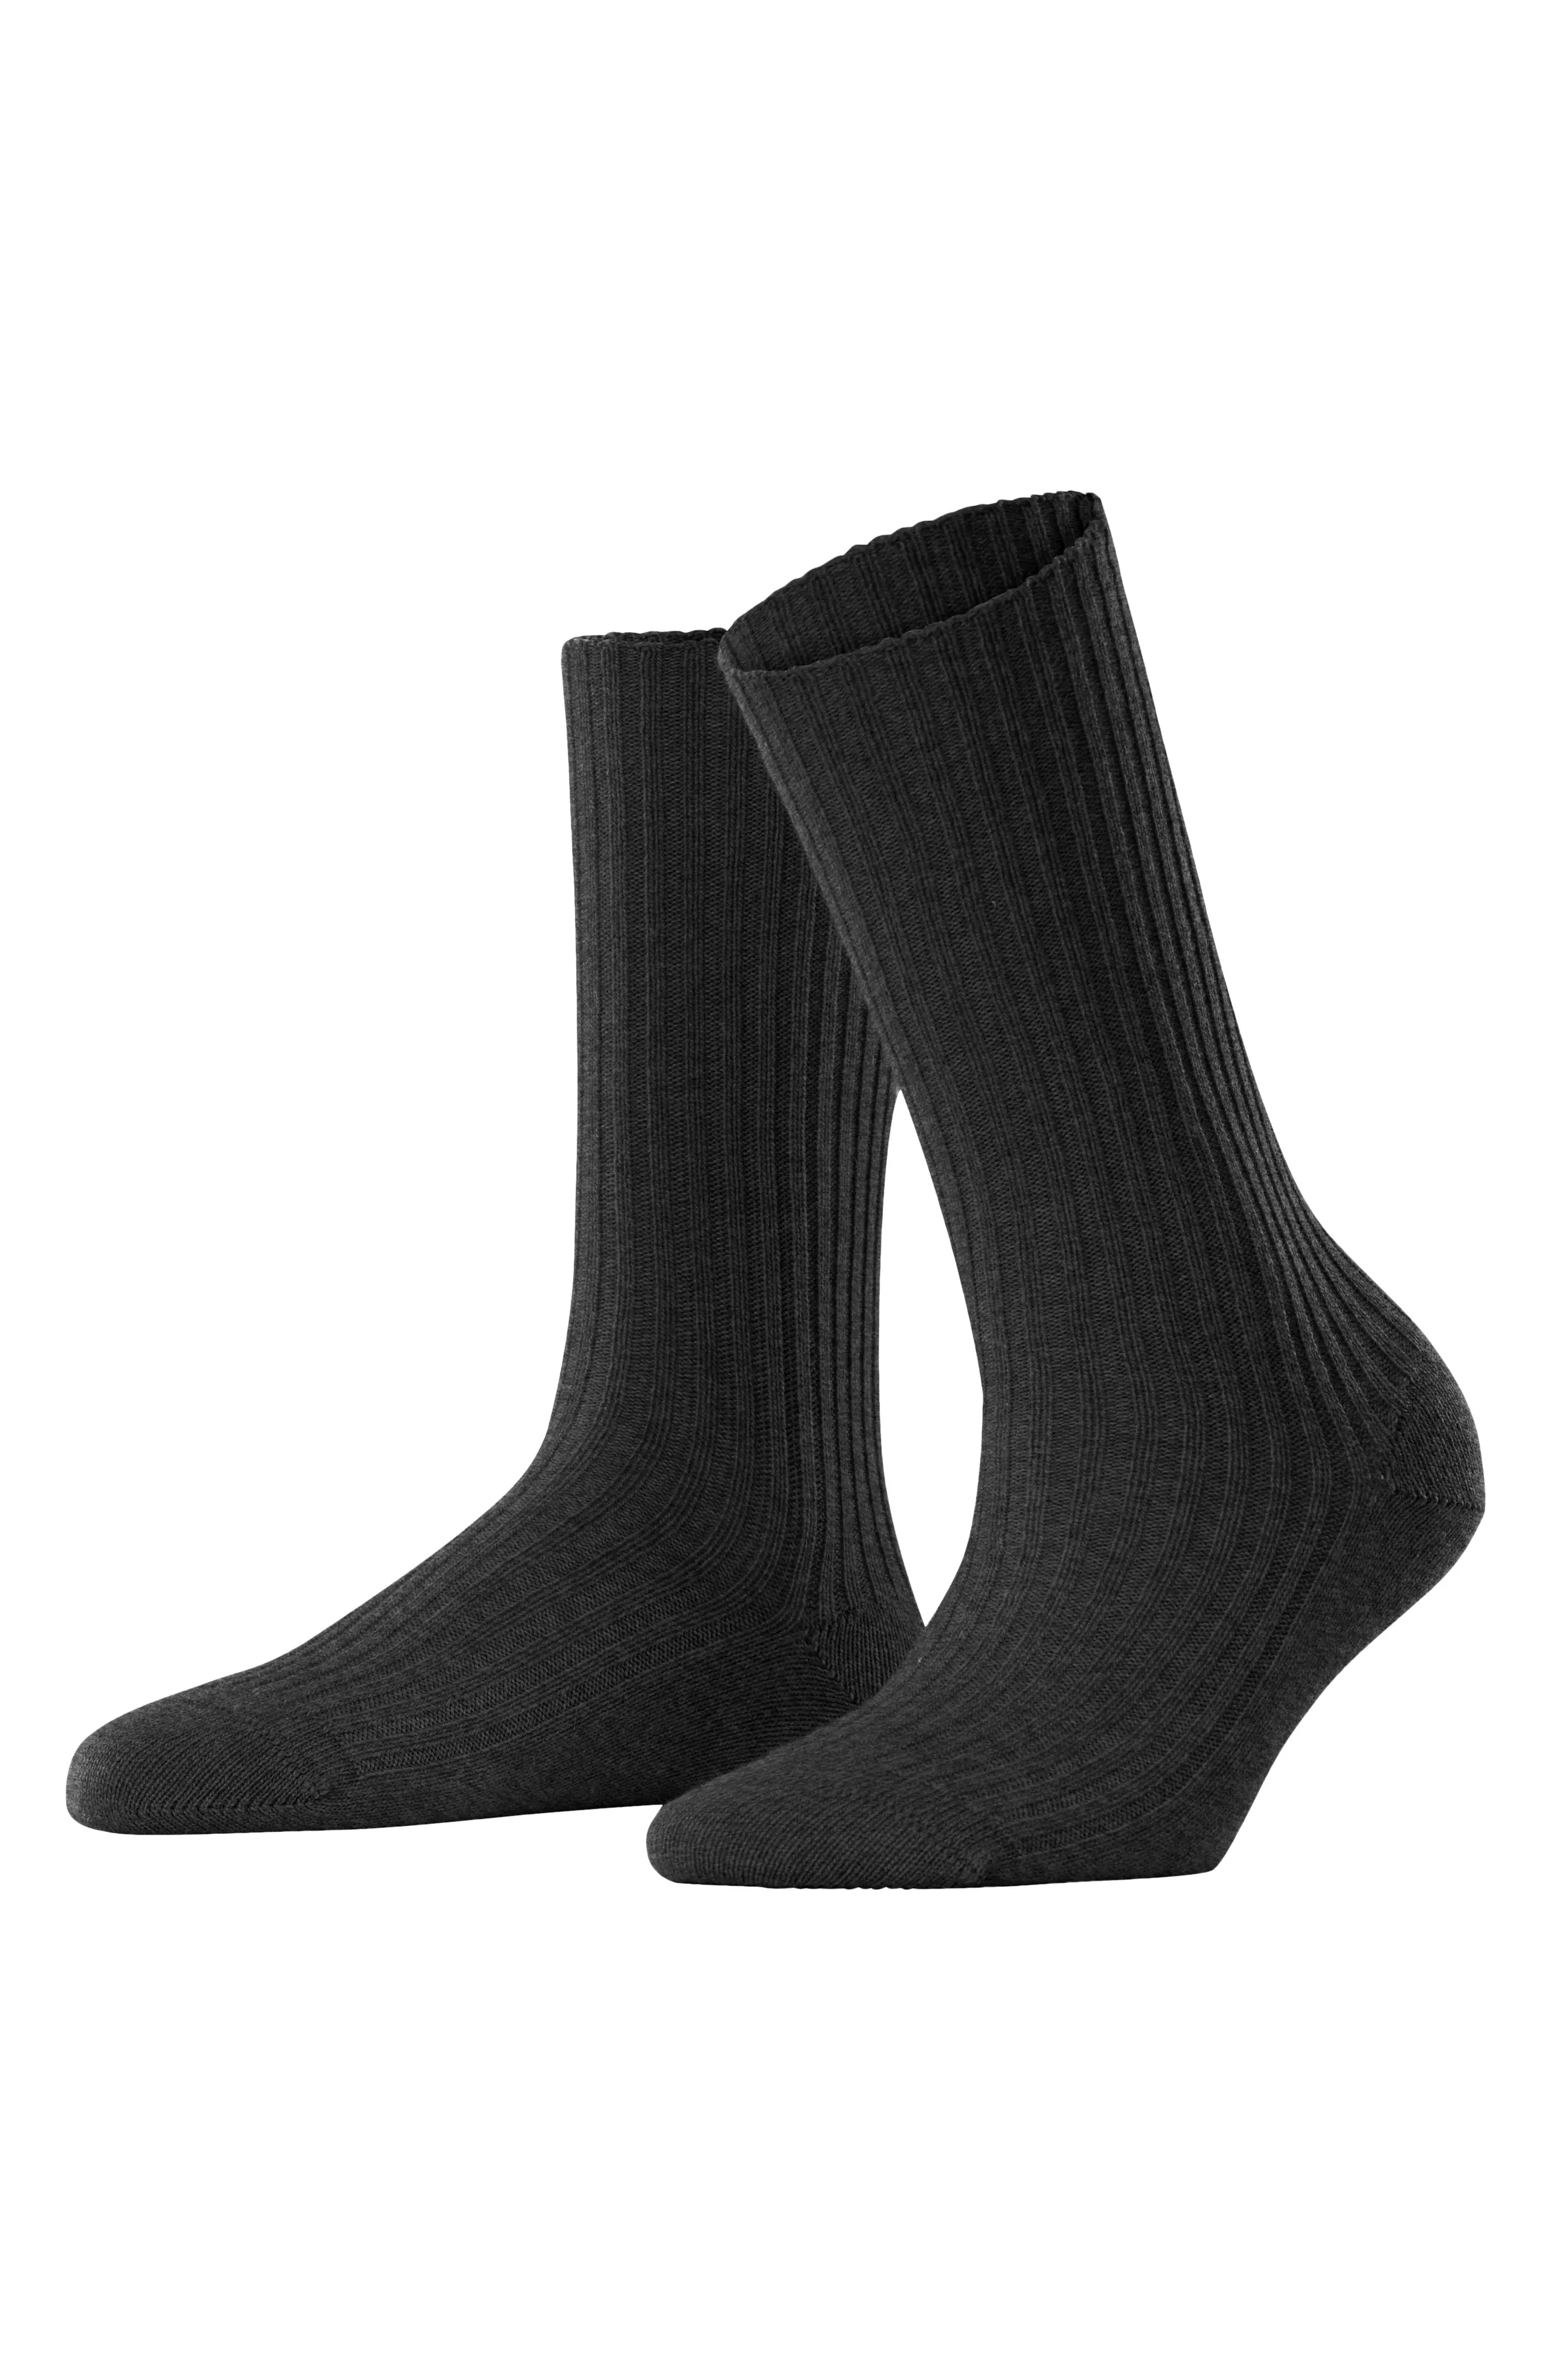 Cosy Wool Blend Boot Socks in Anthra. mel - 1